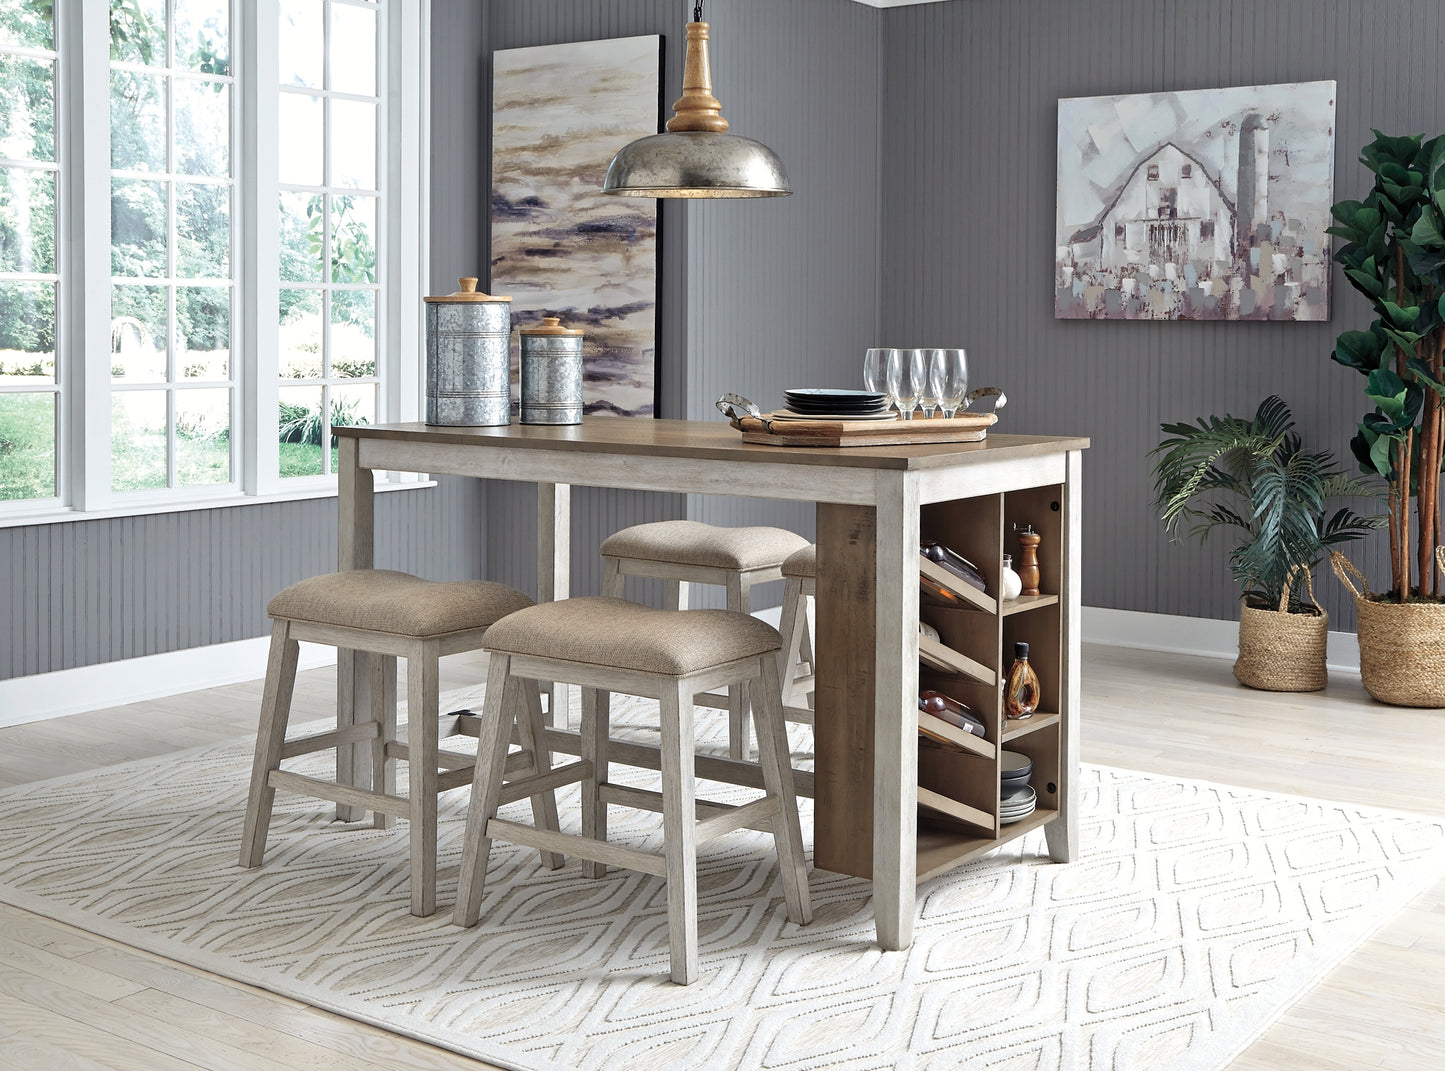 Ashley Express - Skempton Counter Height Dining Table and 4 Barstools